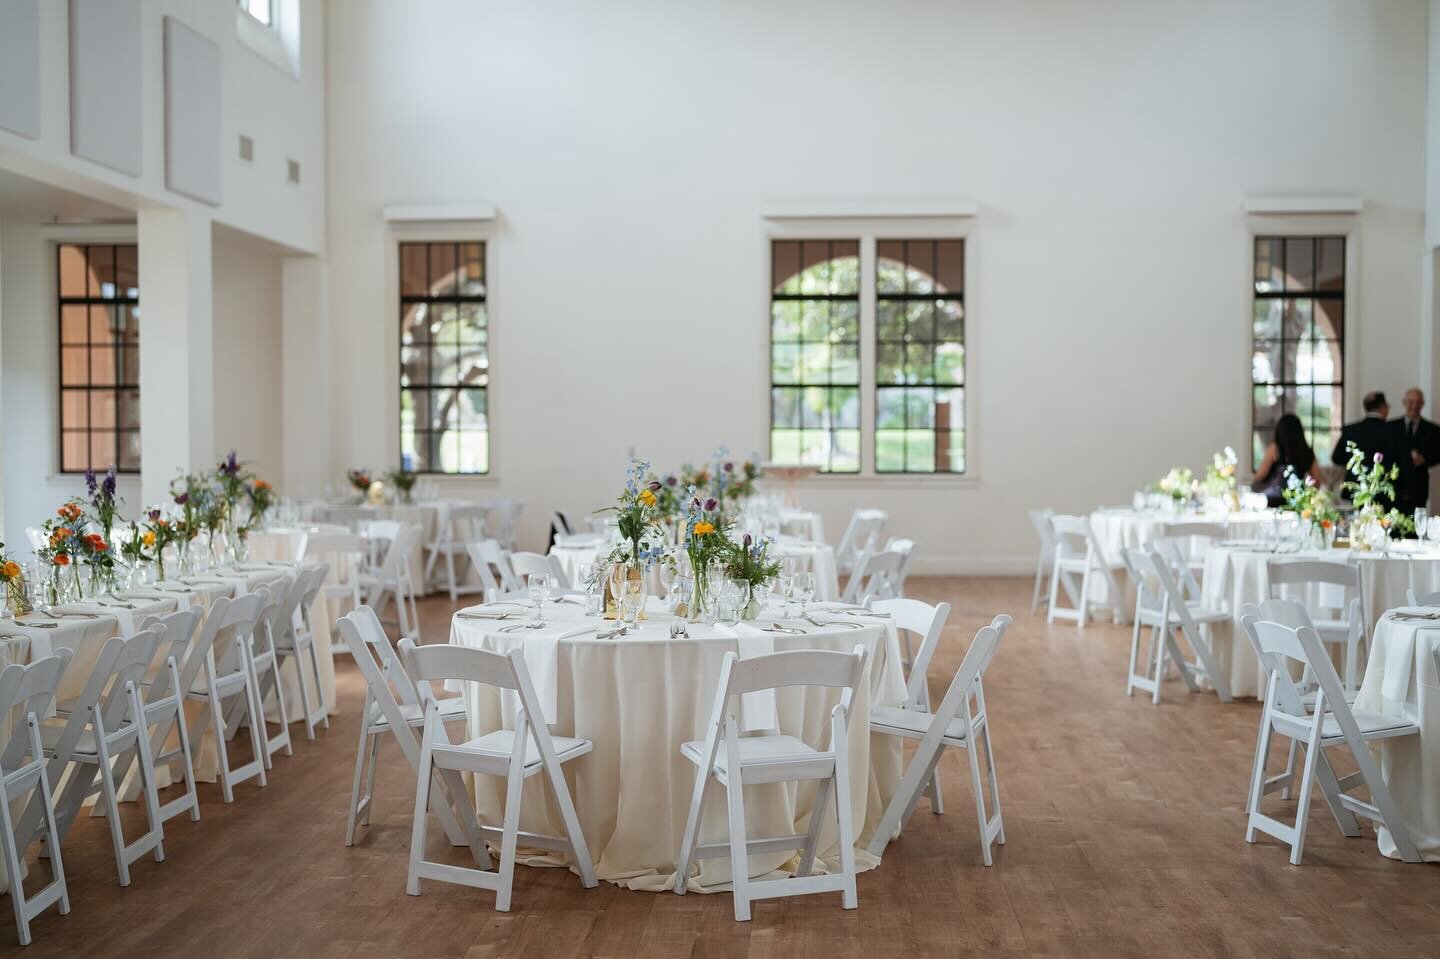 A + R wanted a white canvas for their wedding to create their own wildflower garden 🌿🌼
&bull;
&bull;
&bull;
Coordination @loverevents 
Venue @bldg177 
Photography @symboll 
Catering @continentalcatering 
Rentals @catalogatelier @raphaelspartyrental